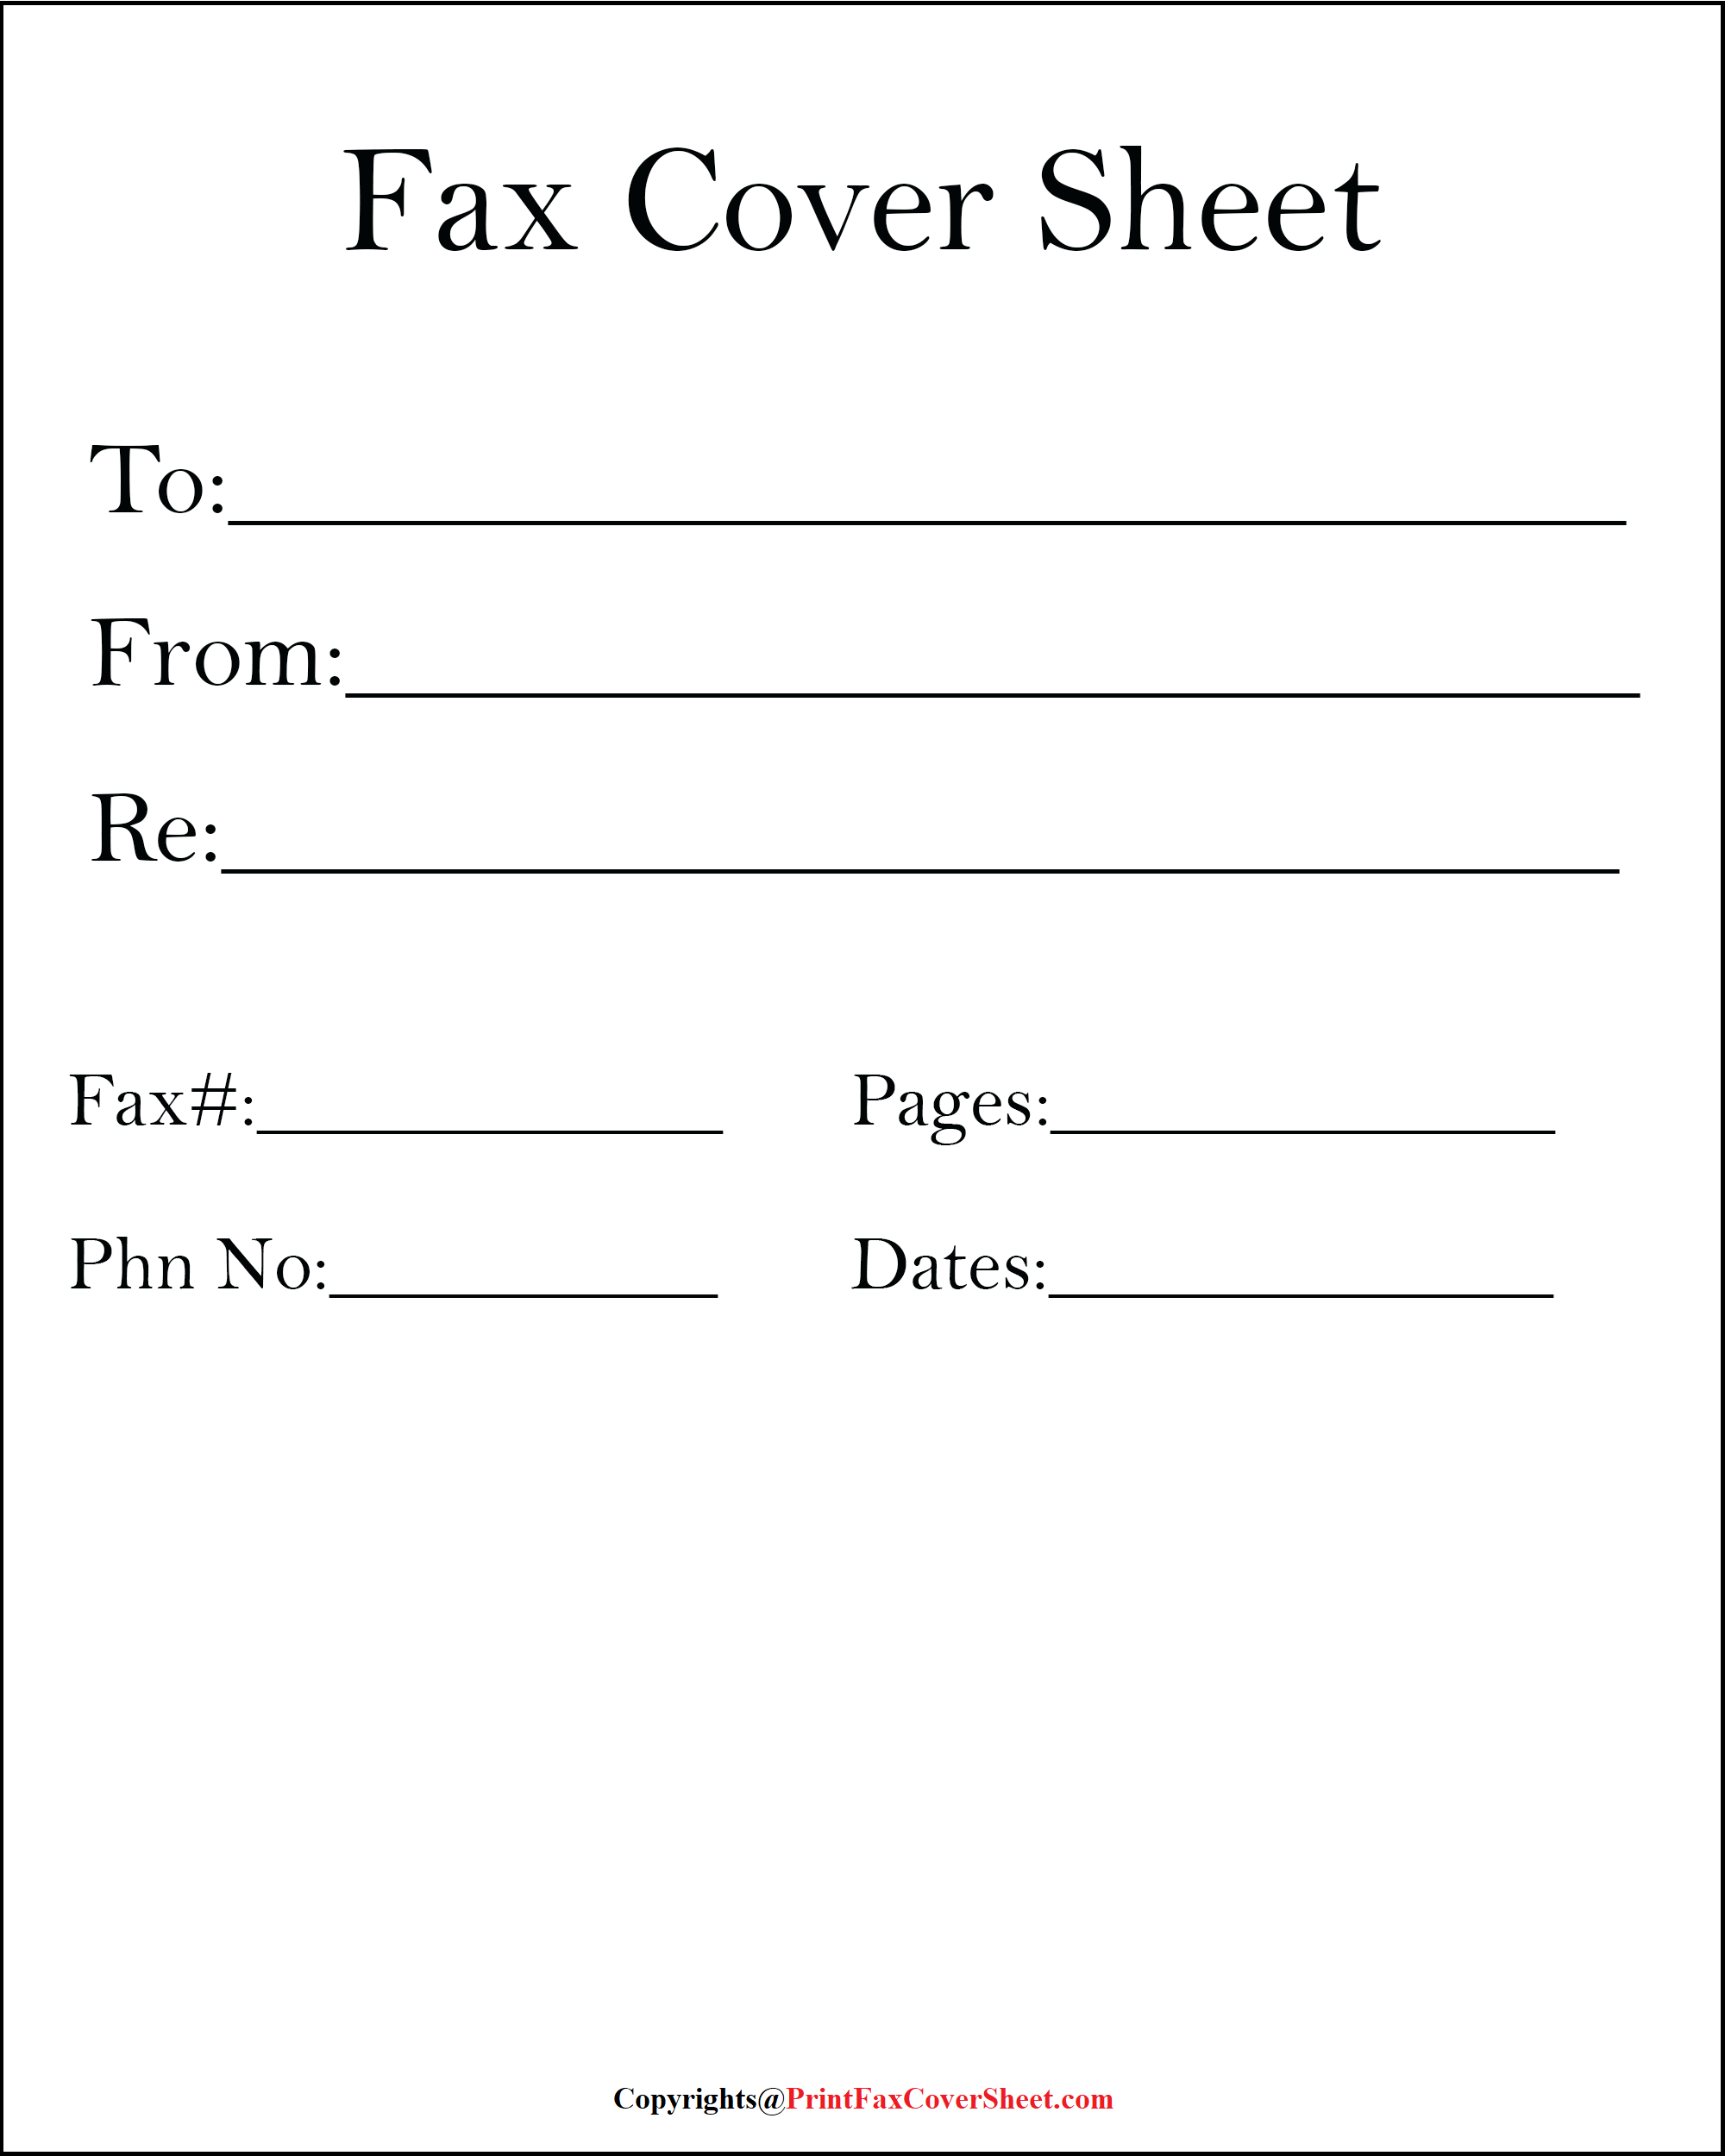 free-printable-blank-fax-cover-sheet-template-pdf-fax-cover-sheet